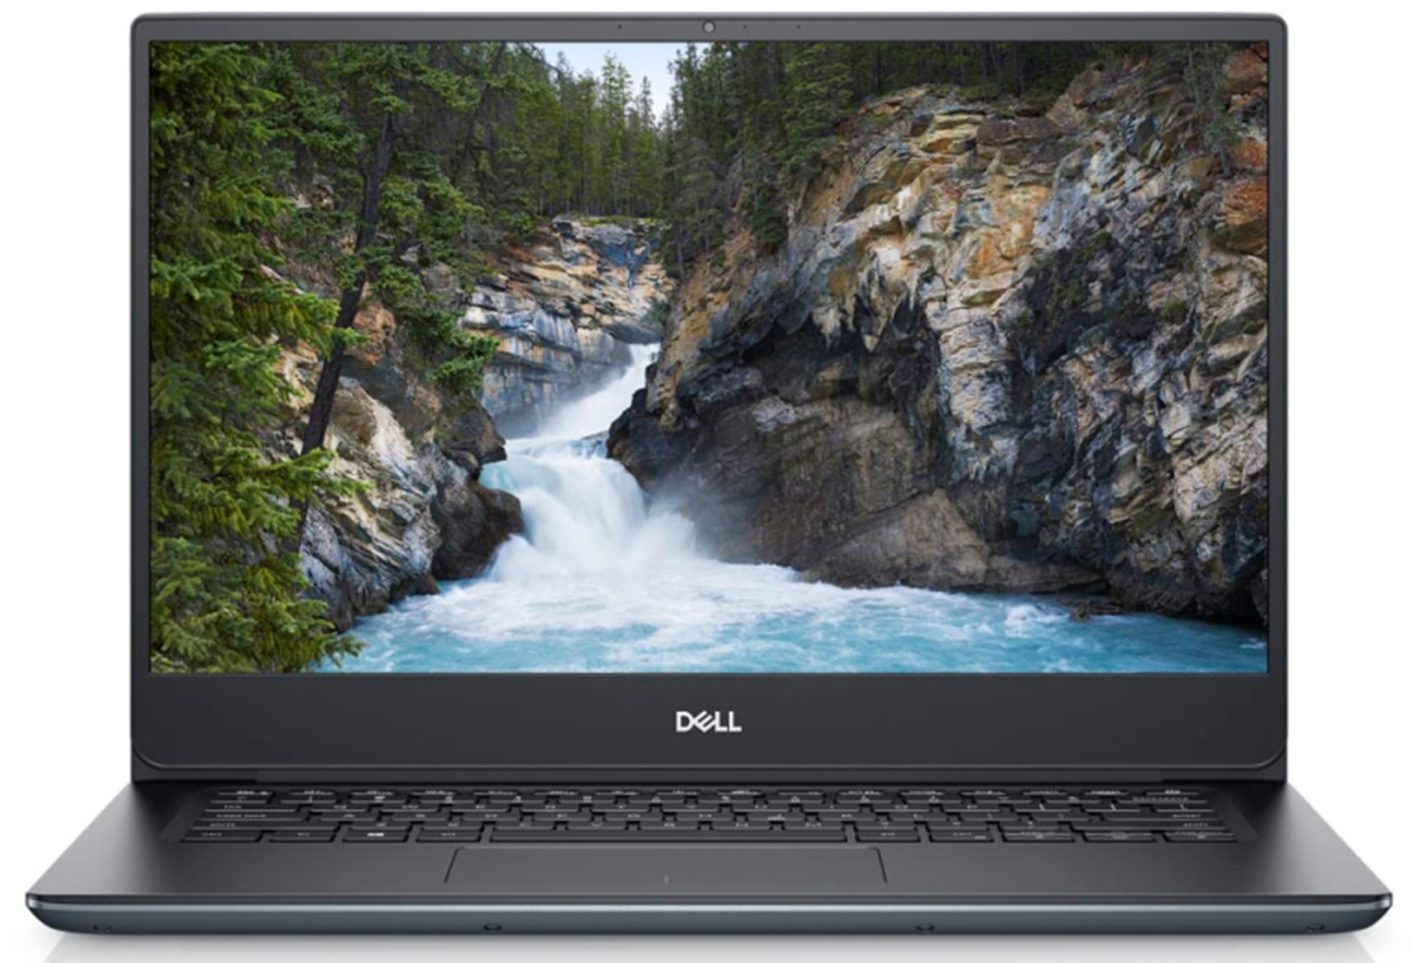 Dell Vostro 5490 review - a hodgepodge between an XPS and a 